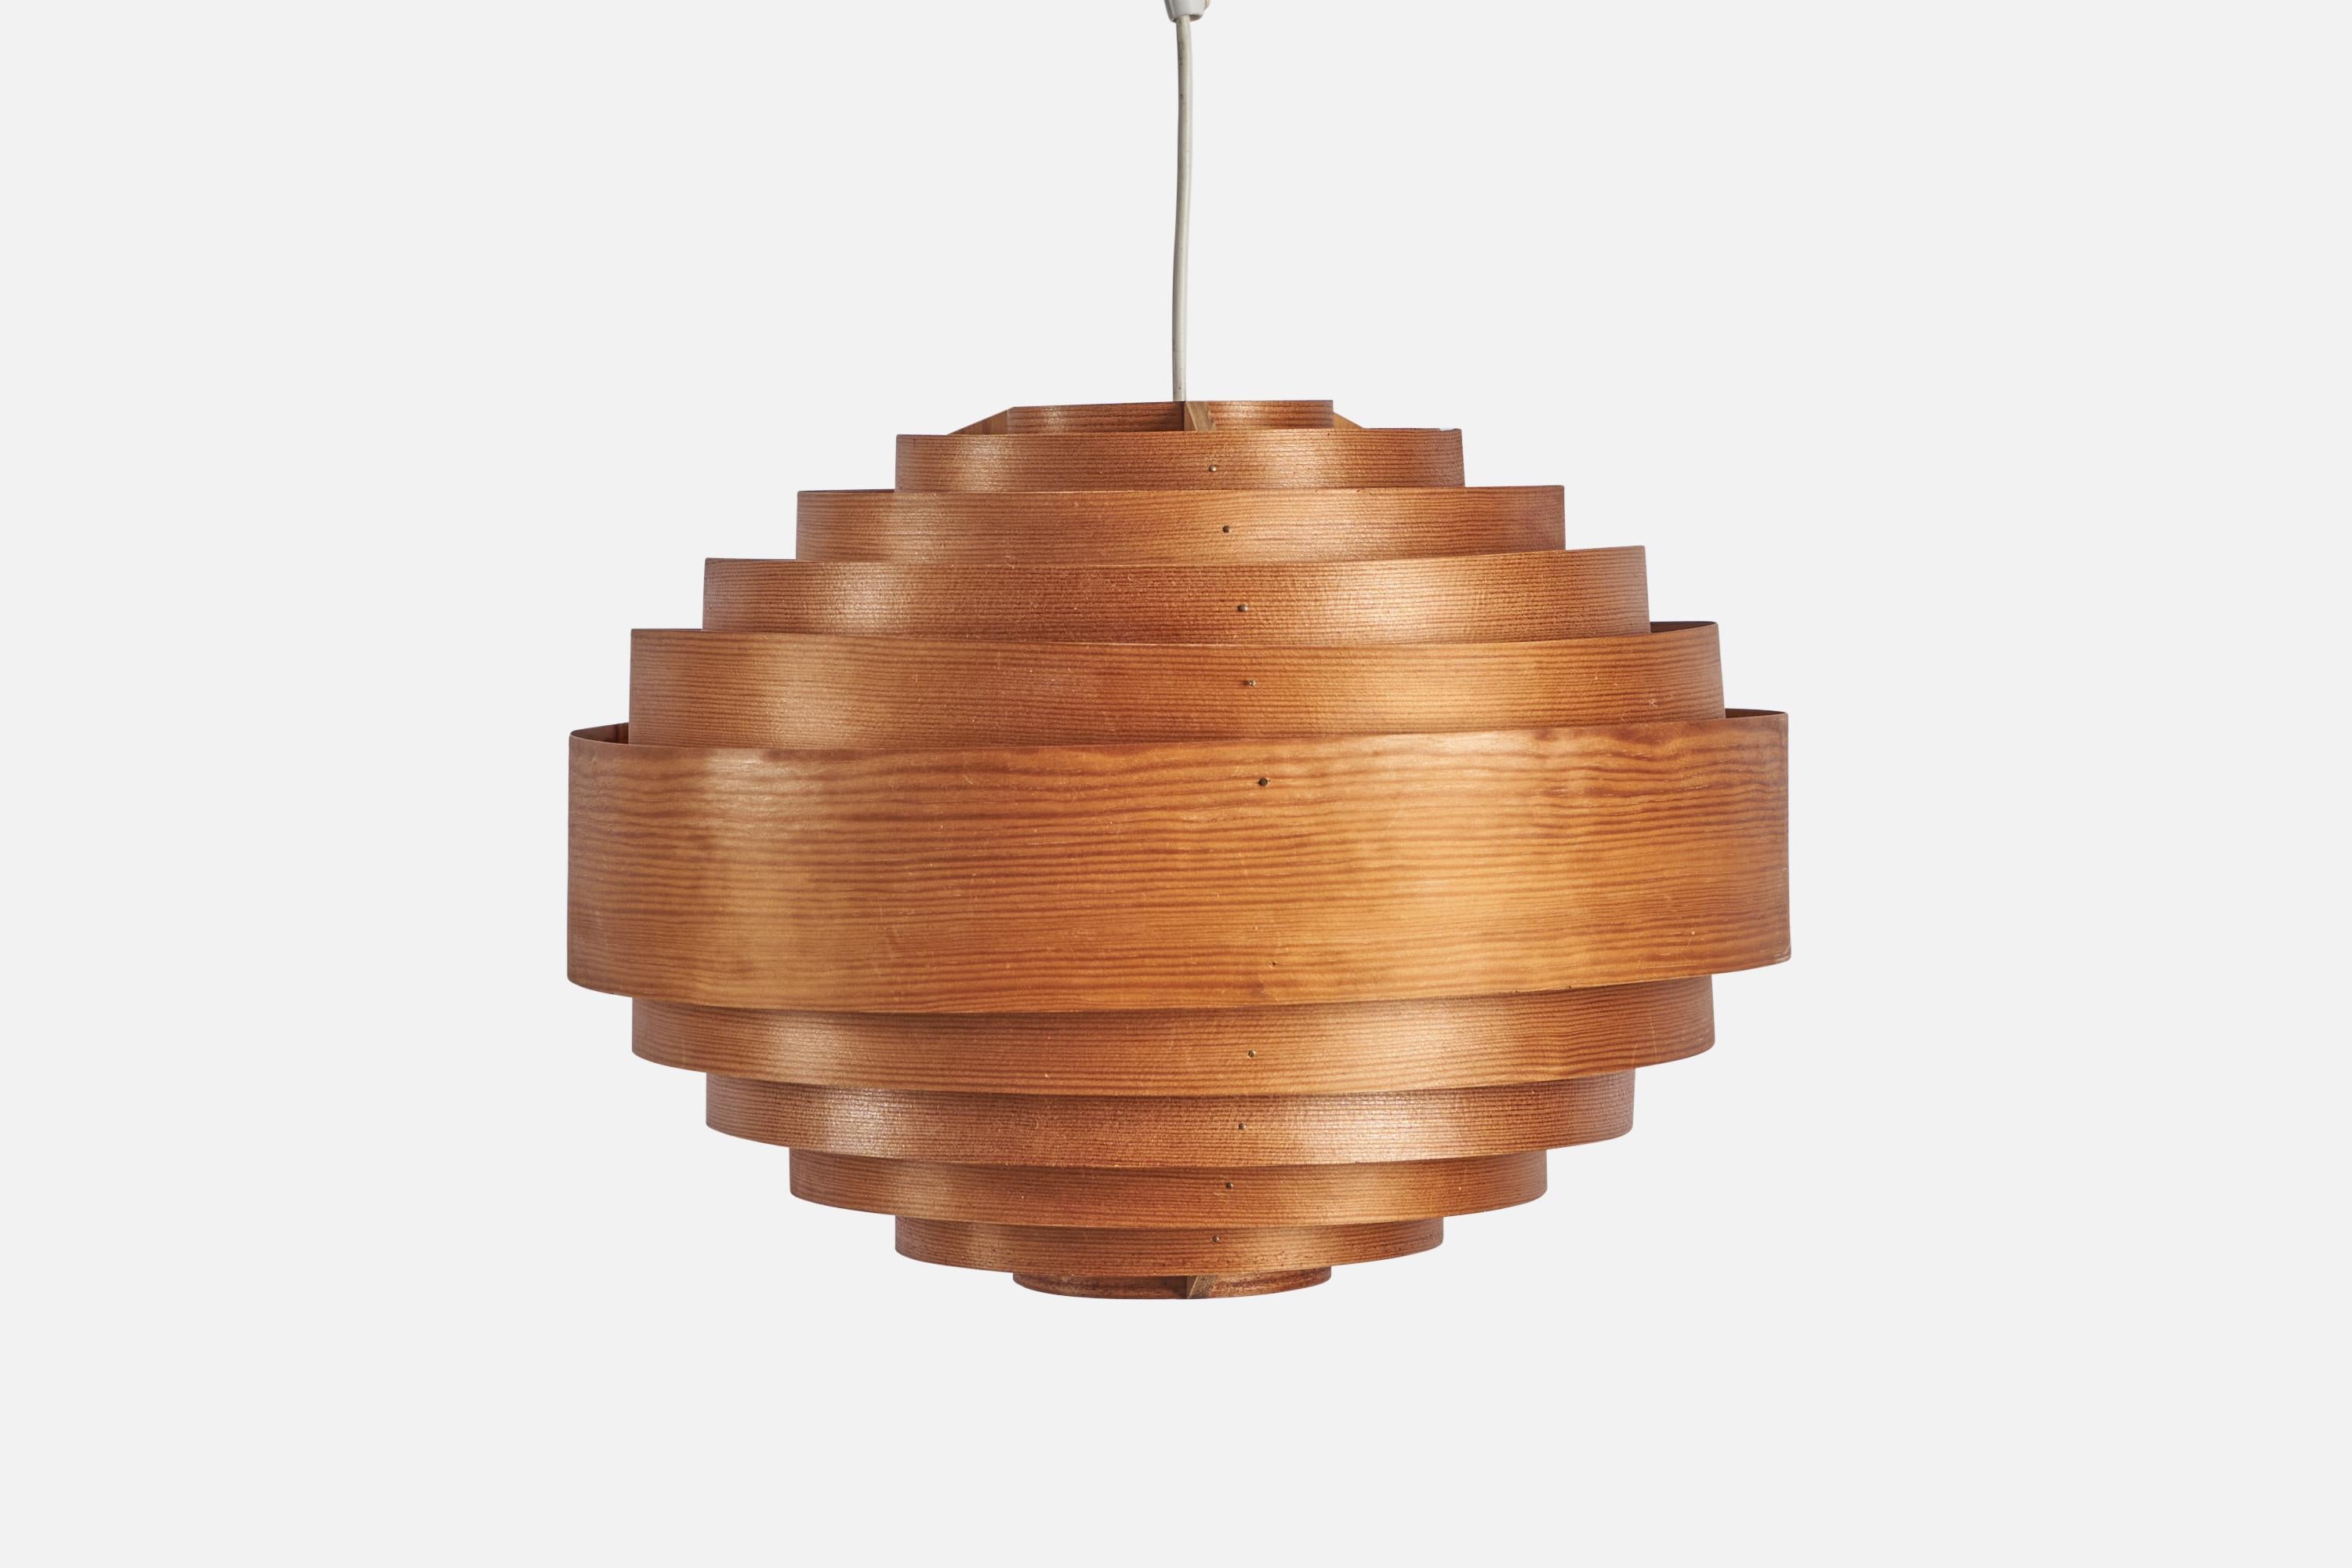 A pine and moulded pine veneer pendant light designed by Hans-Agne Jakobsson and produced by Elysett, Sweden, 1970s.

Overall Dimensions (inches): 11.5” H x 17” Diameter
Bulb Specifications: E-26 Bulb
Number of Sockets: 1
Drop variable, for a